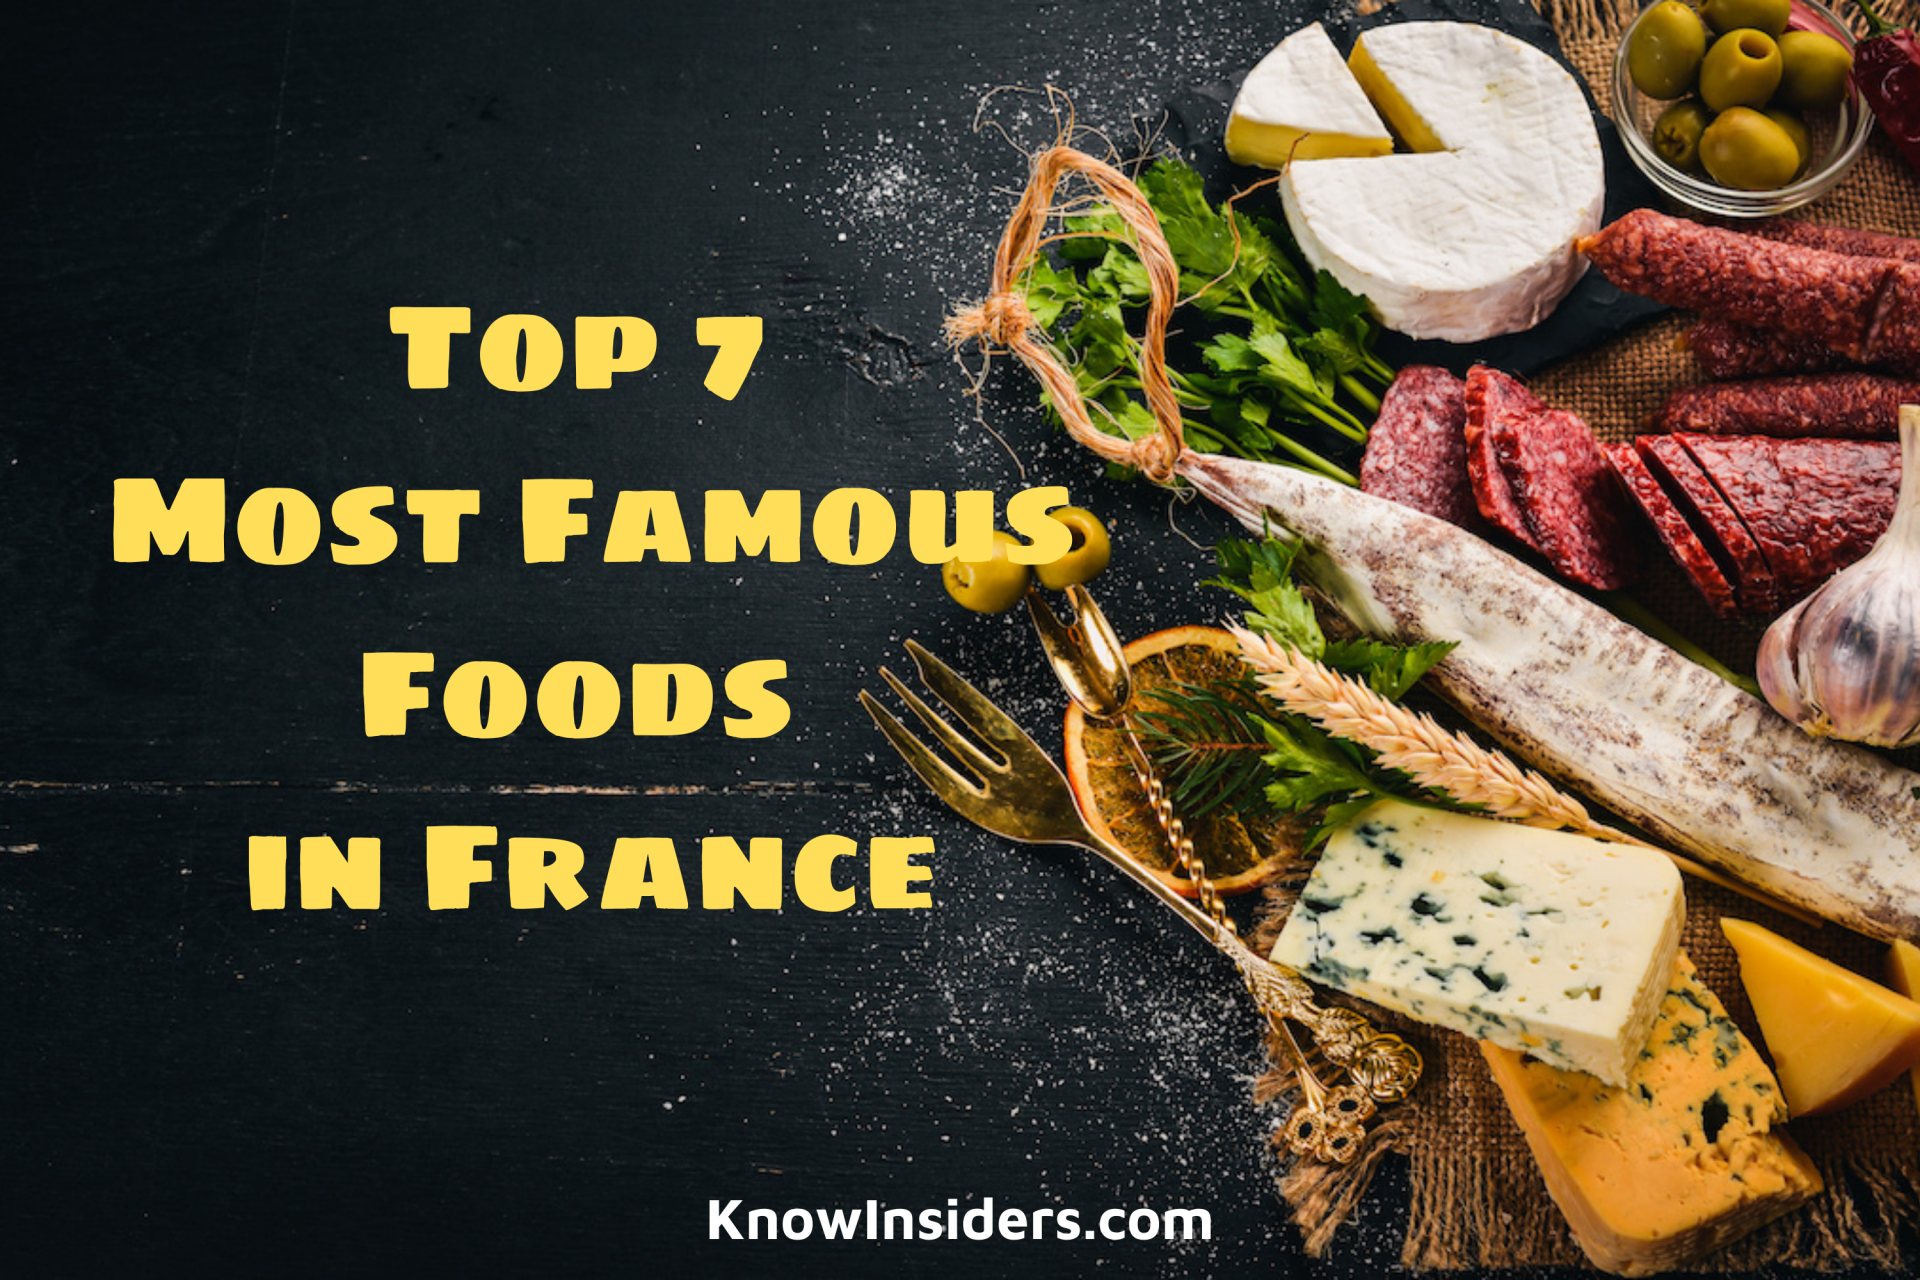 Top 7 Most Famous Foods in France